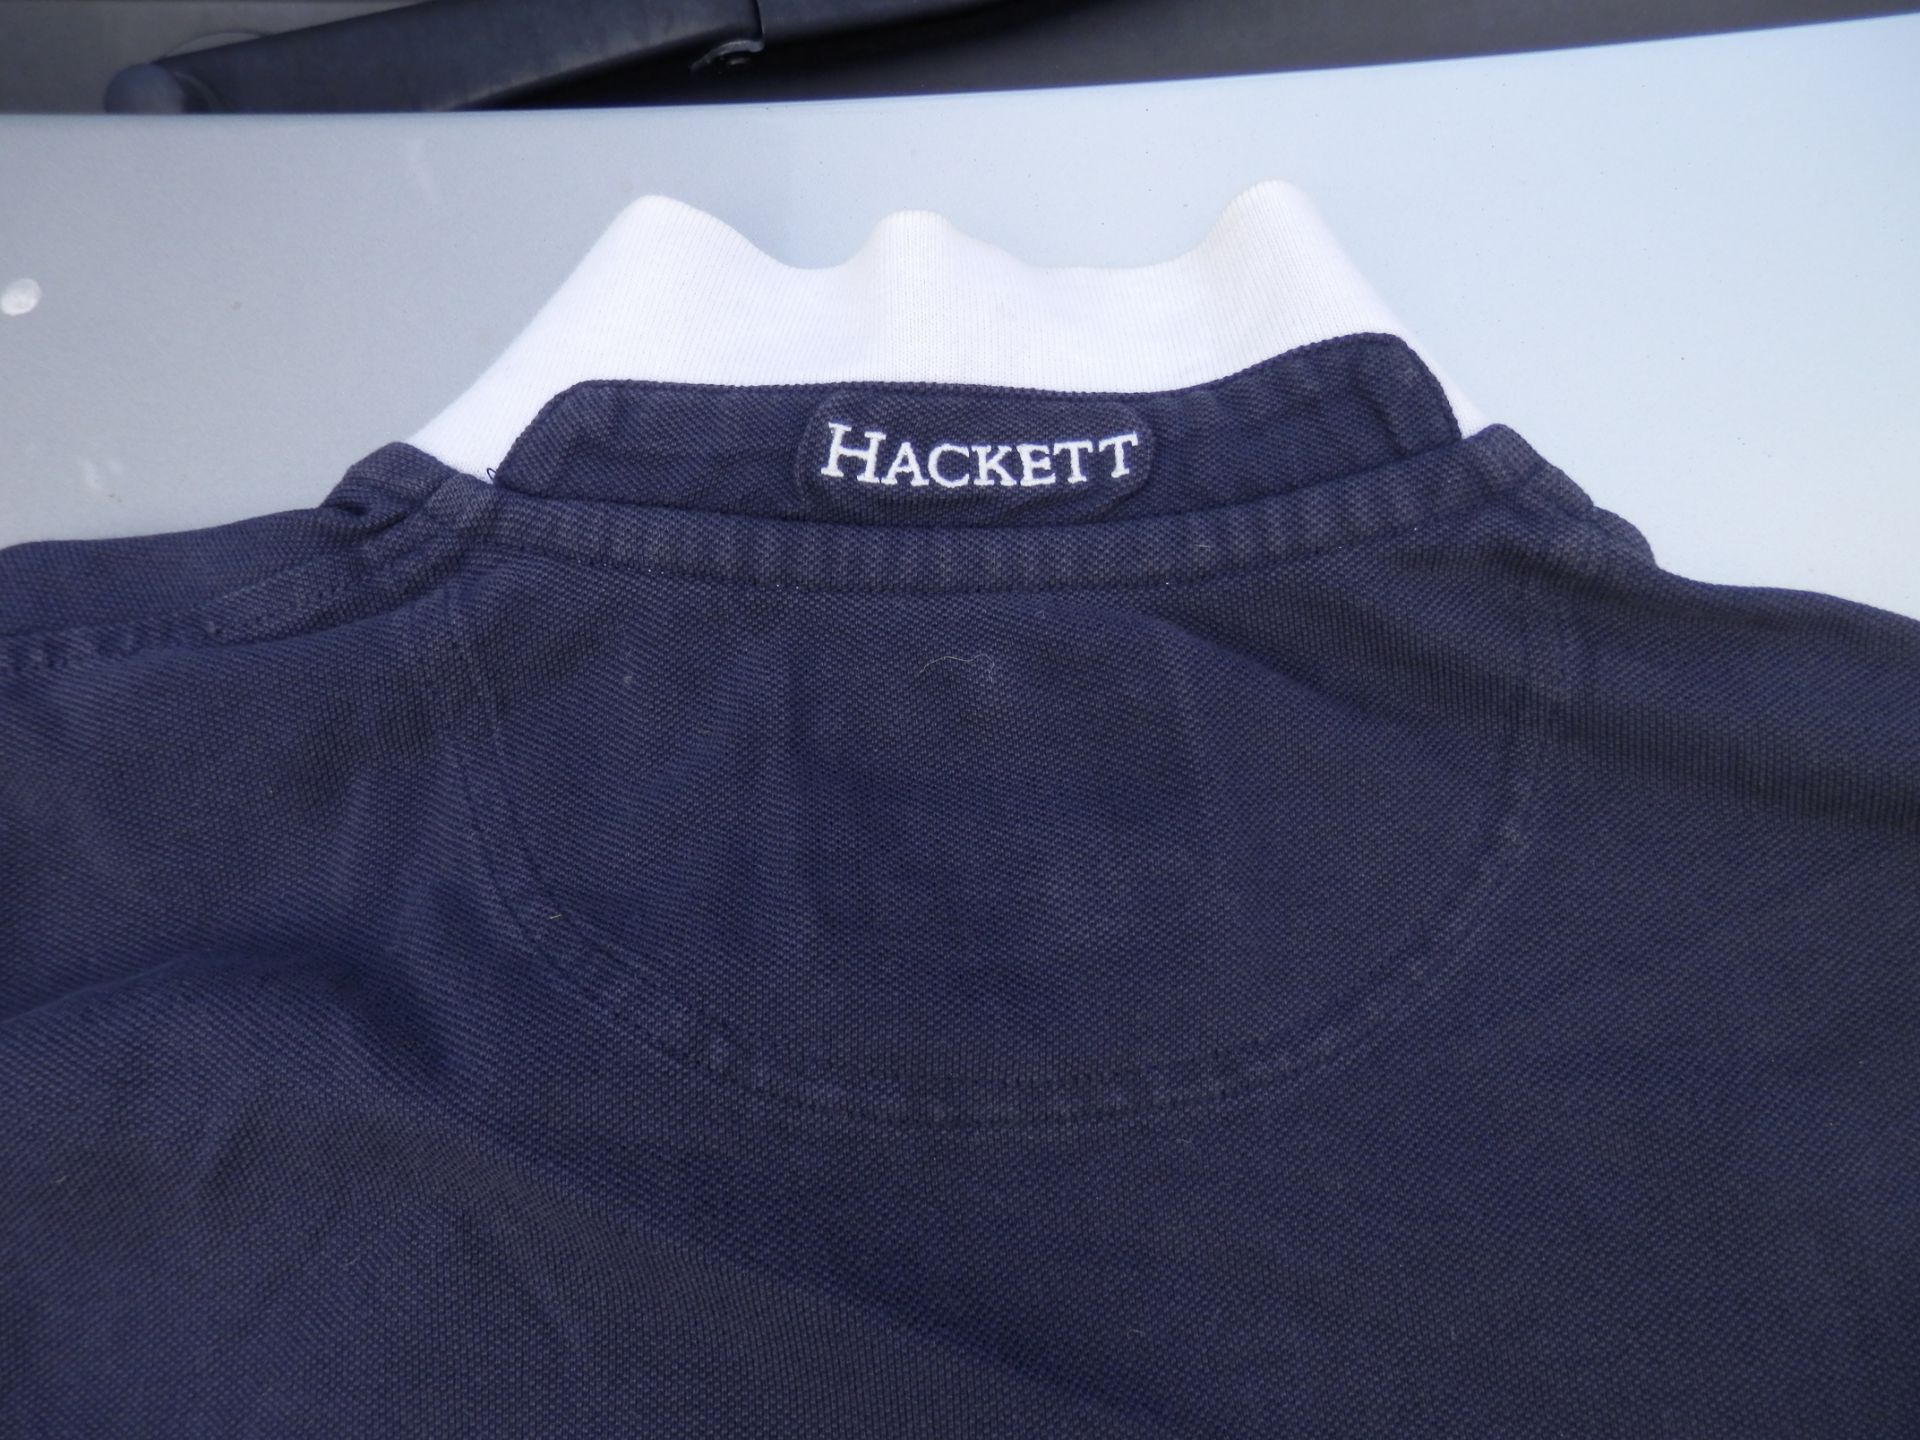 GENTS USED HACKETT POLO SHIRT IN XL, BLUE & WHITE, NO1. USED CONDITION. - Image 4 of 4